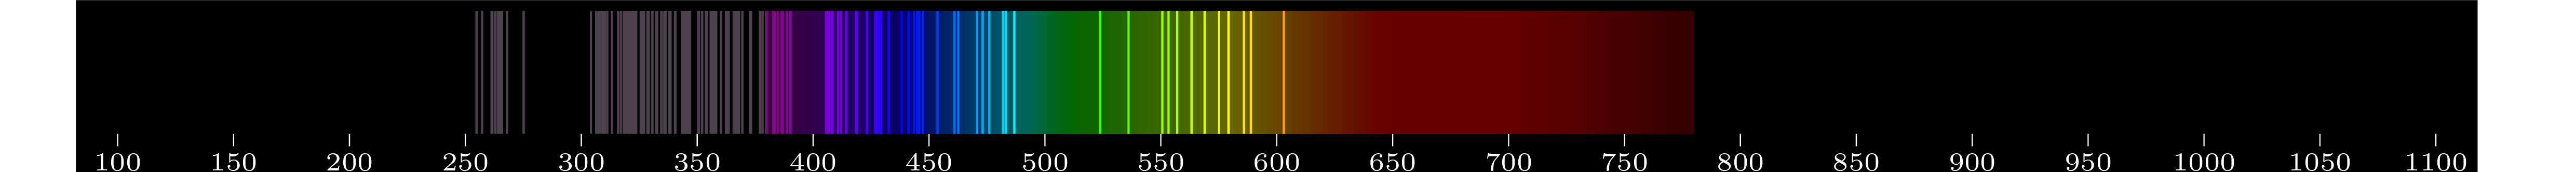 emmision spectra of element Mo